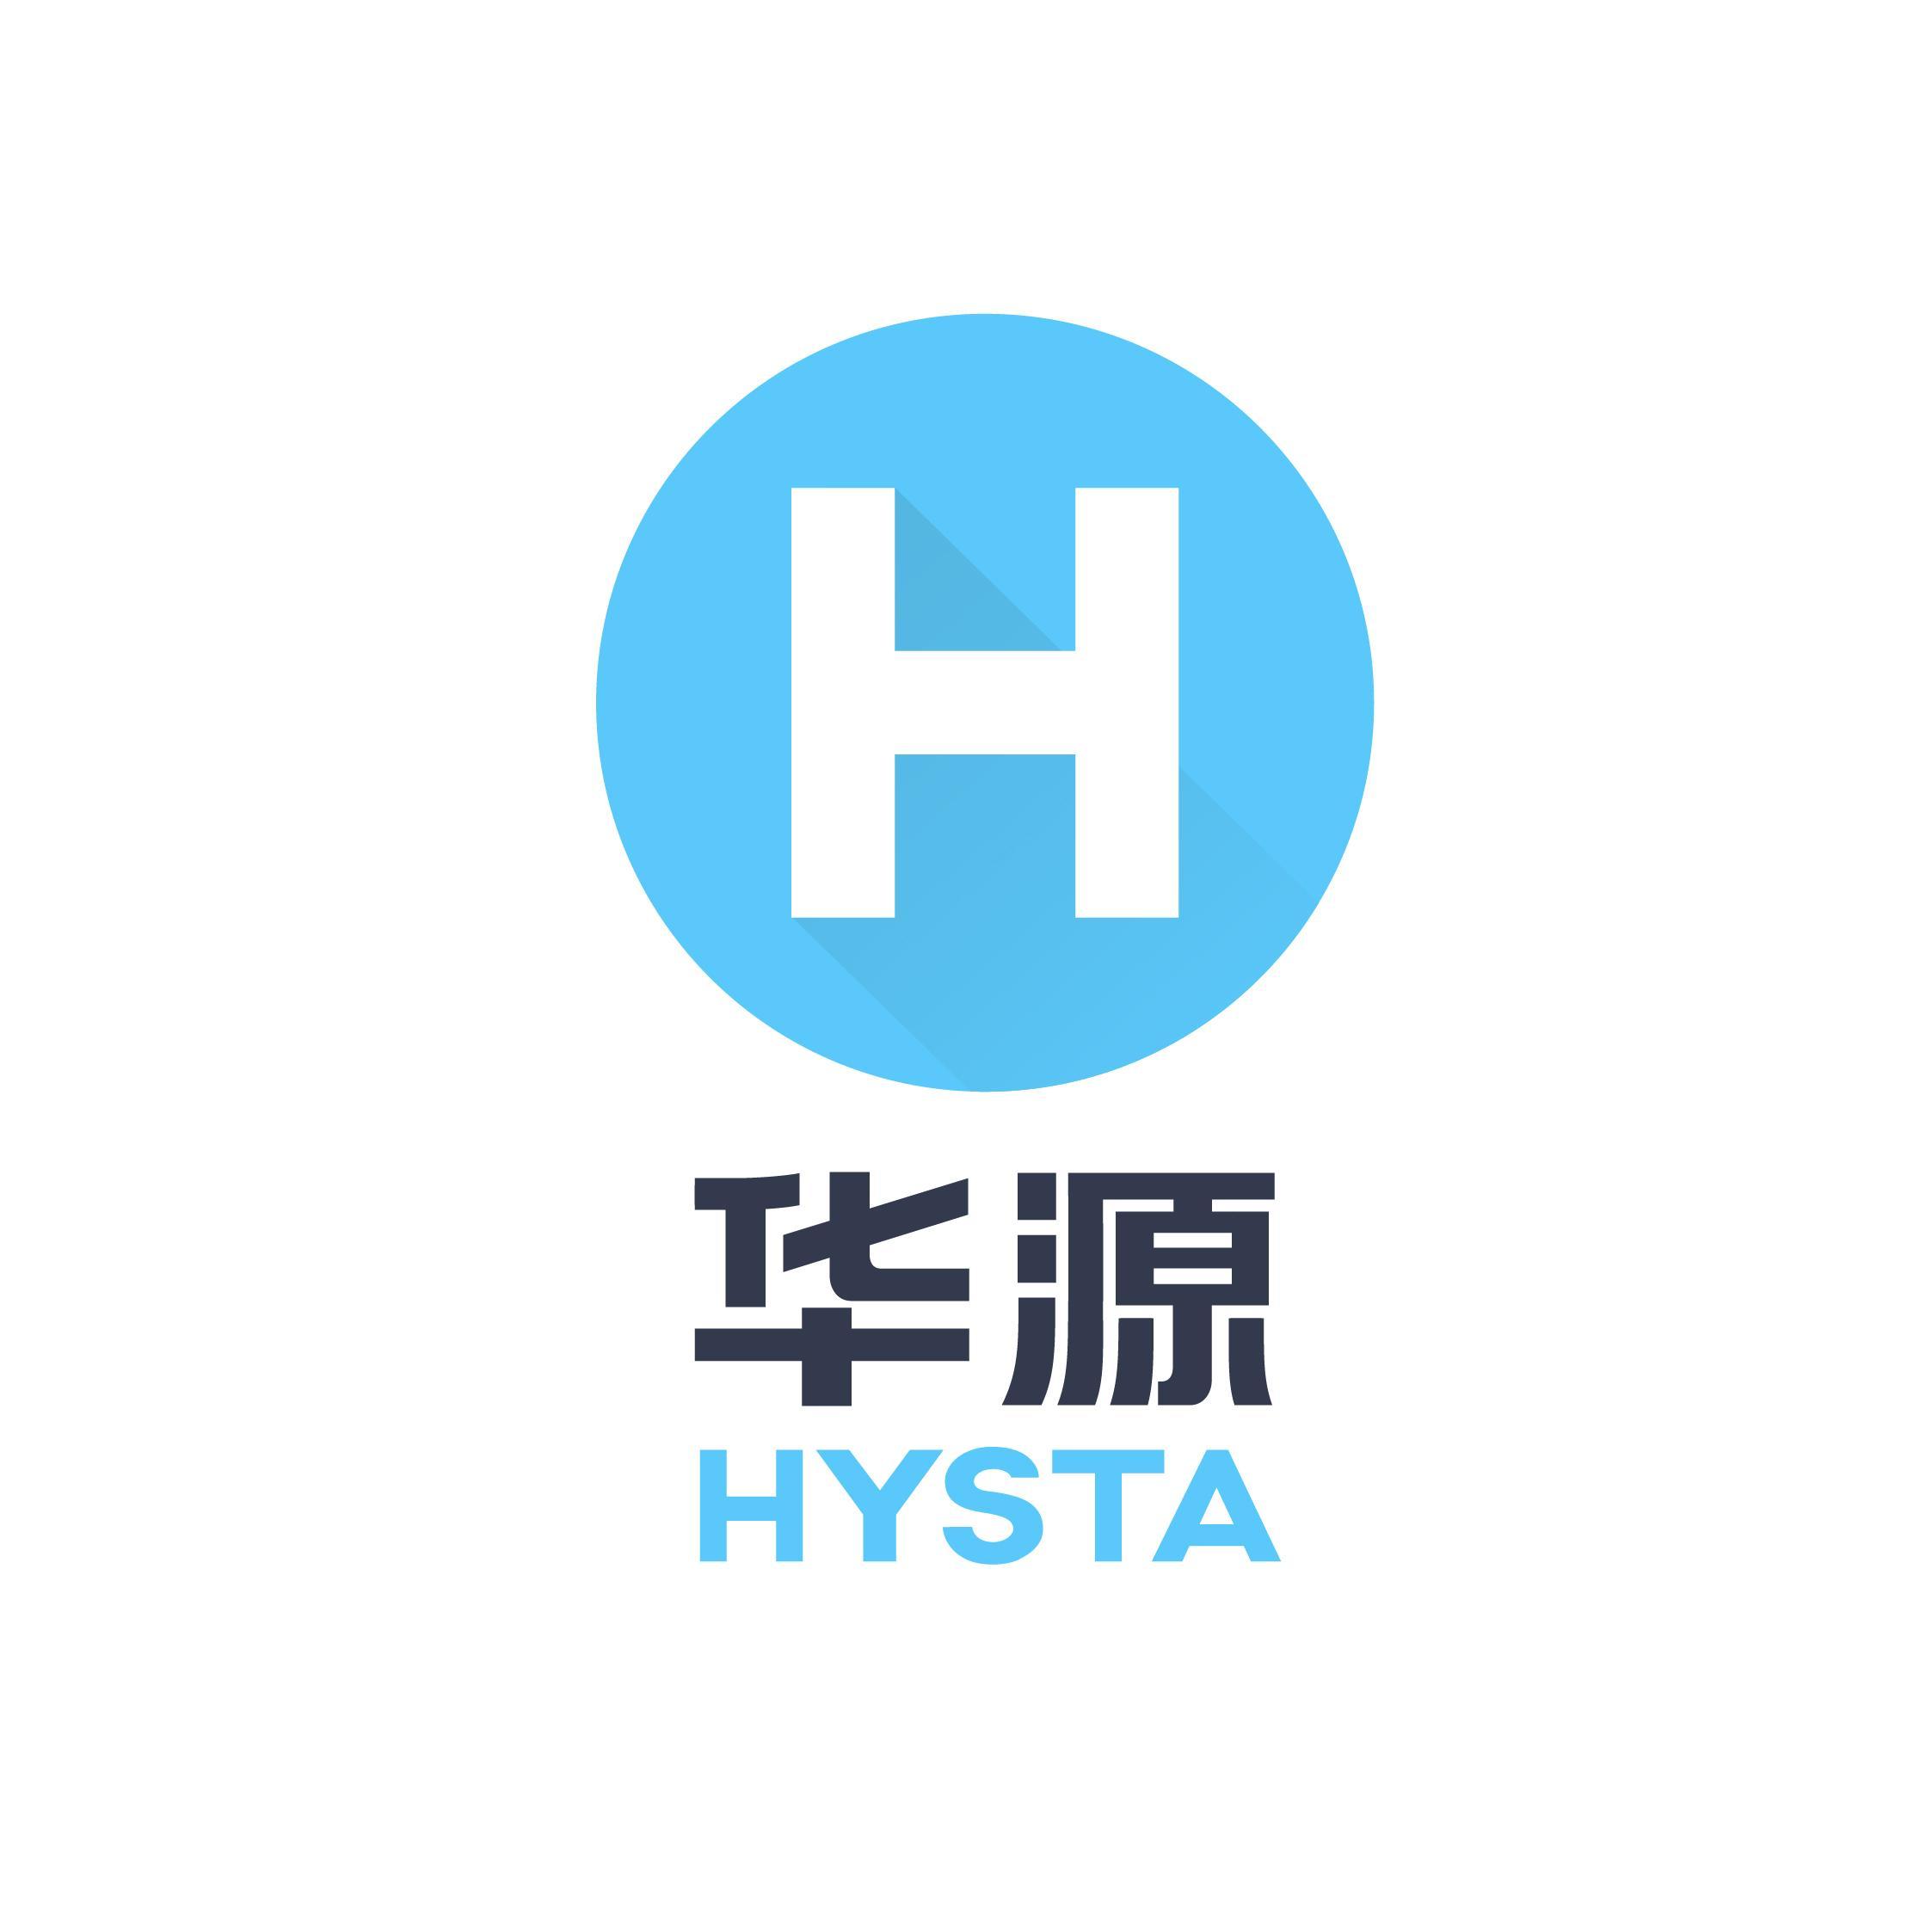 Established in 1999, HYSTA is the leading non-profit organization that empowers Chinese American entrepreneurs and leaders.